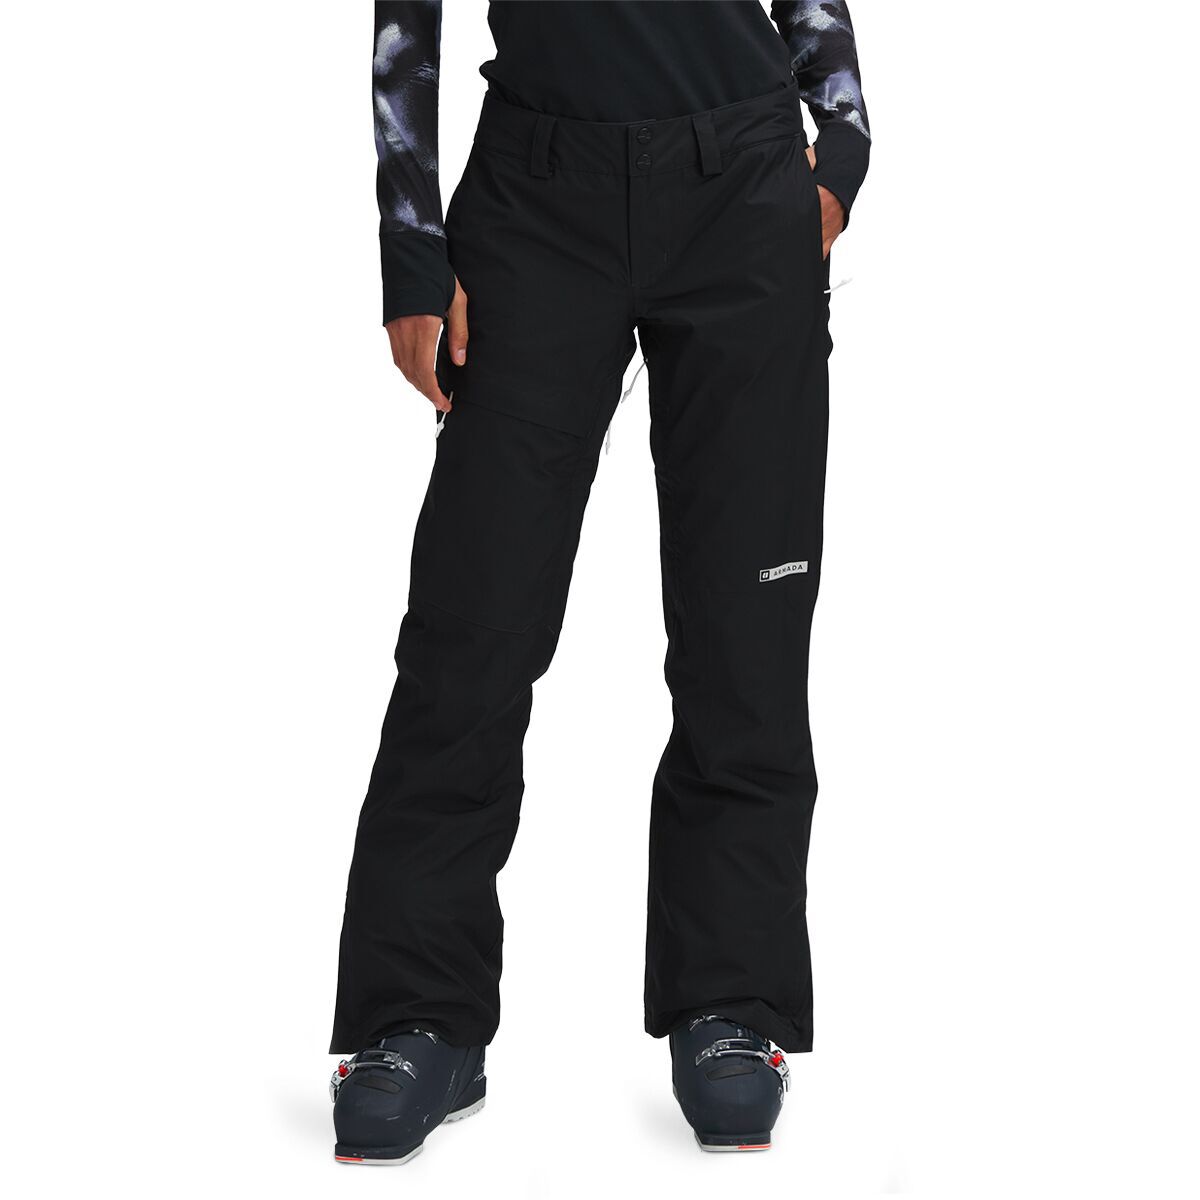 Trego GORE-TEX 2L Insulated Pant - Women